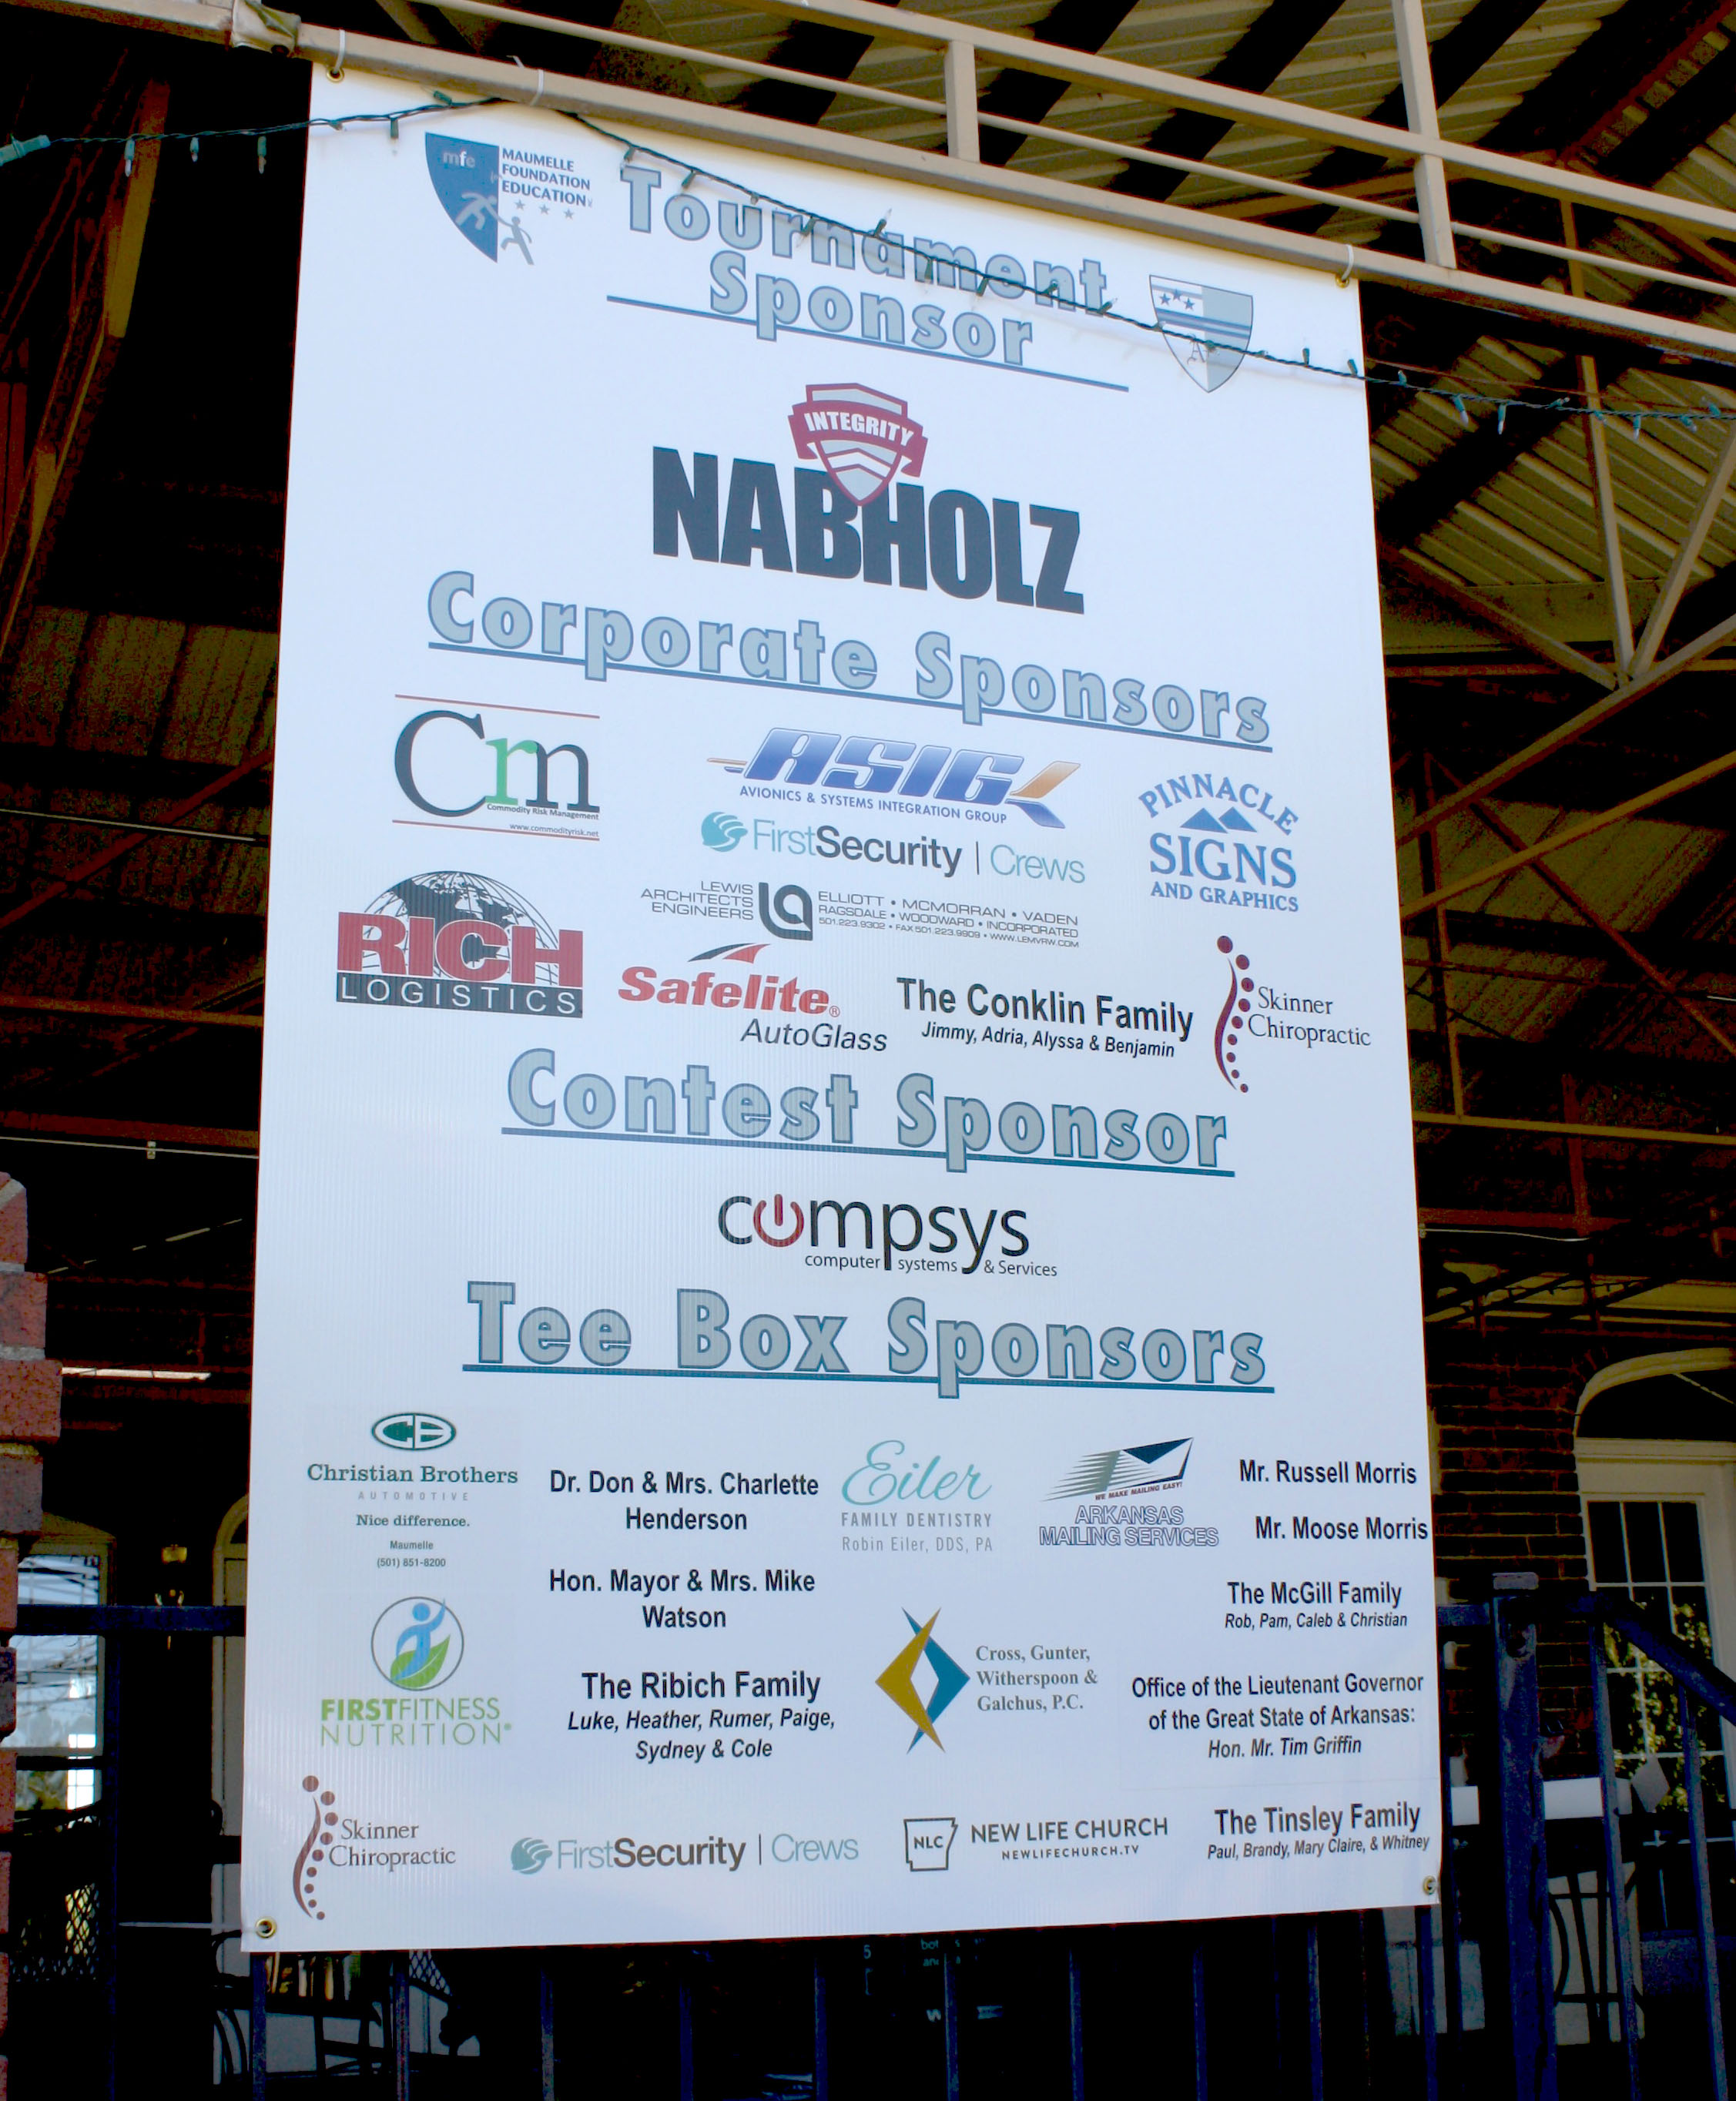 Golf tournament sponsorship signs to benefit the Maumelle Foundation ...